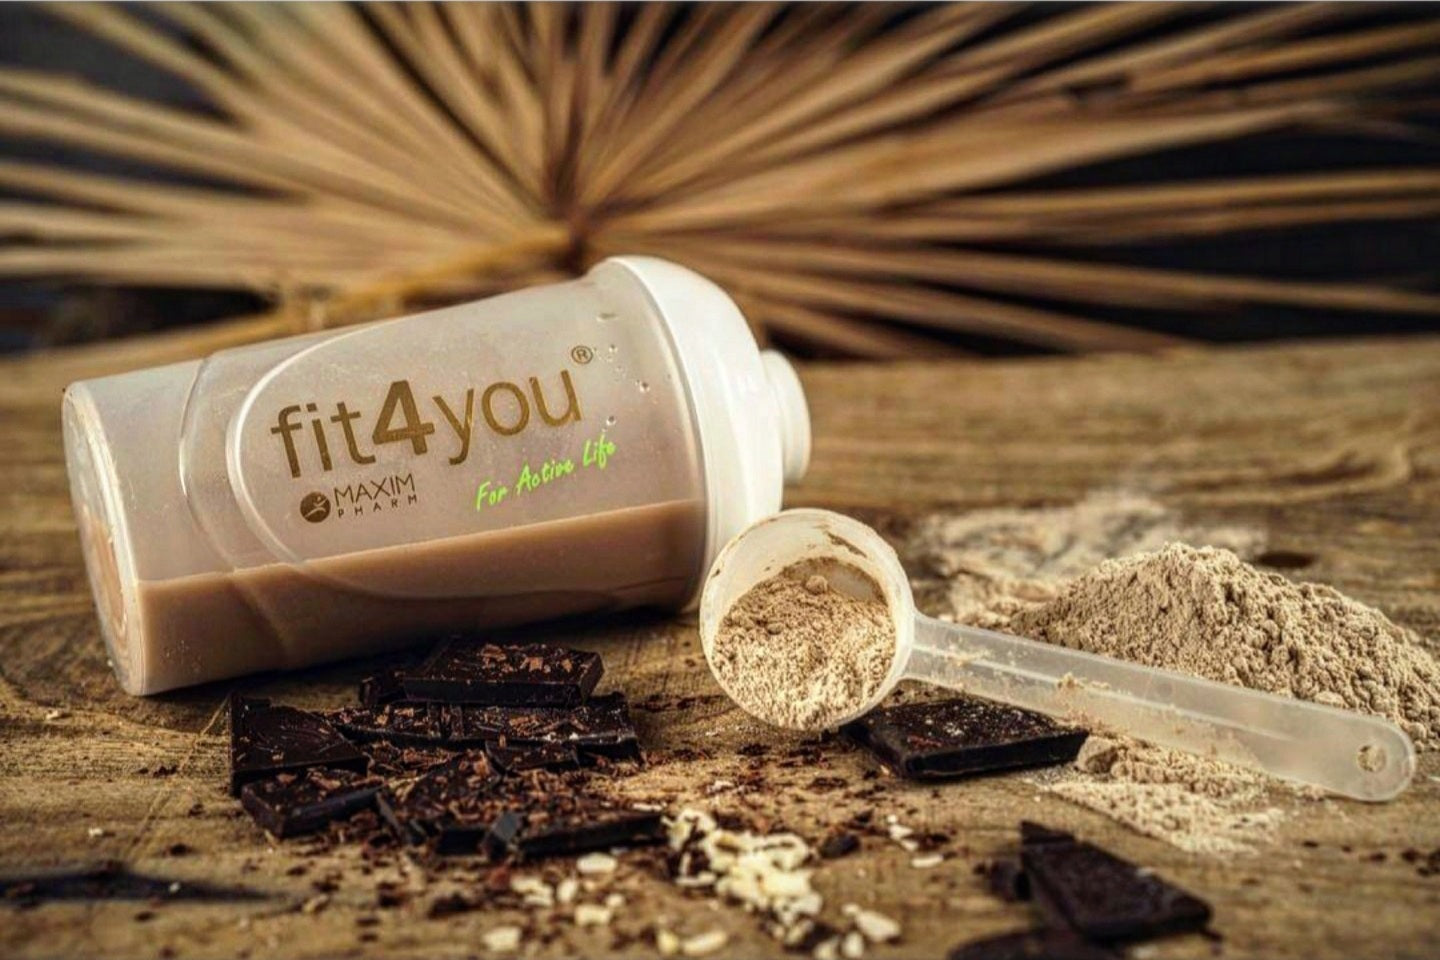 fit4you® Multi Whey Protein